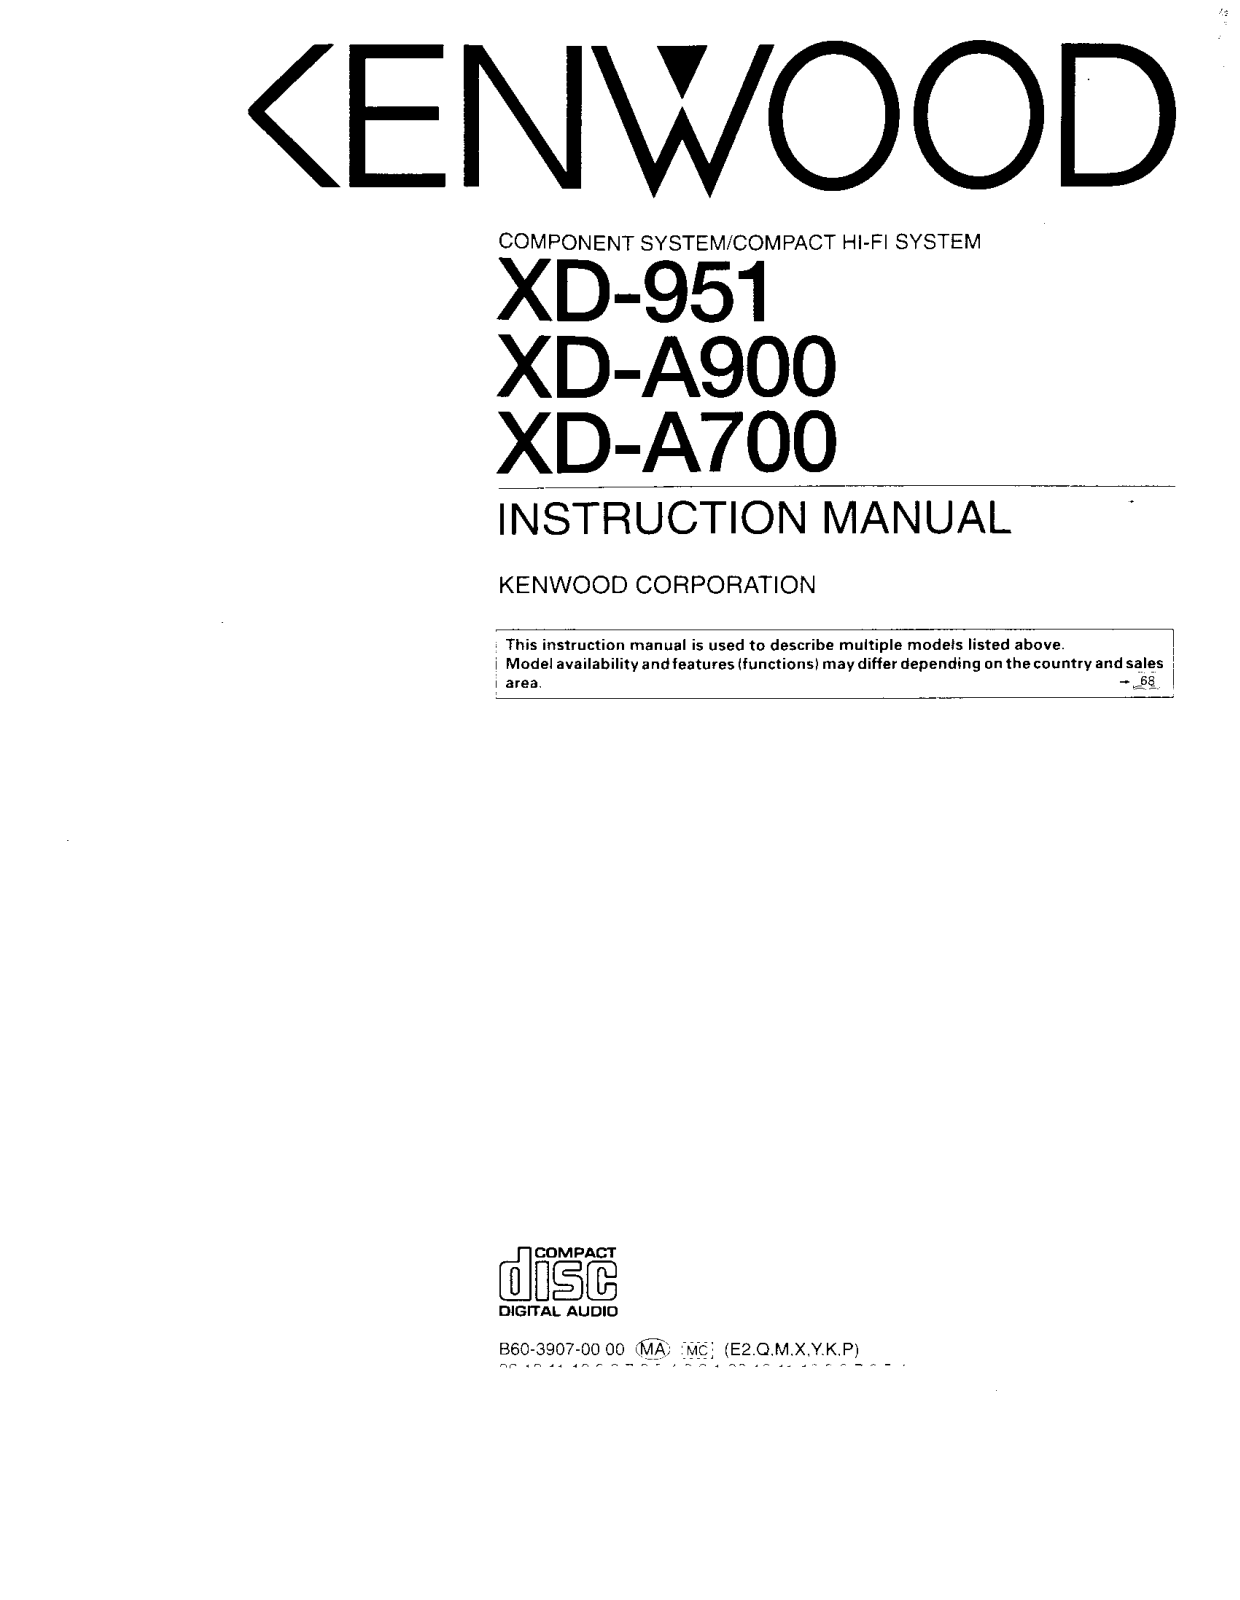 Kenwood XD-A700, XD-A900, XD-951, RXD-A700, RXD-A900 Owner's Manual